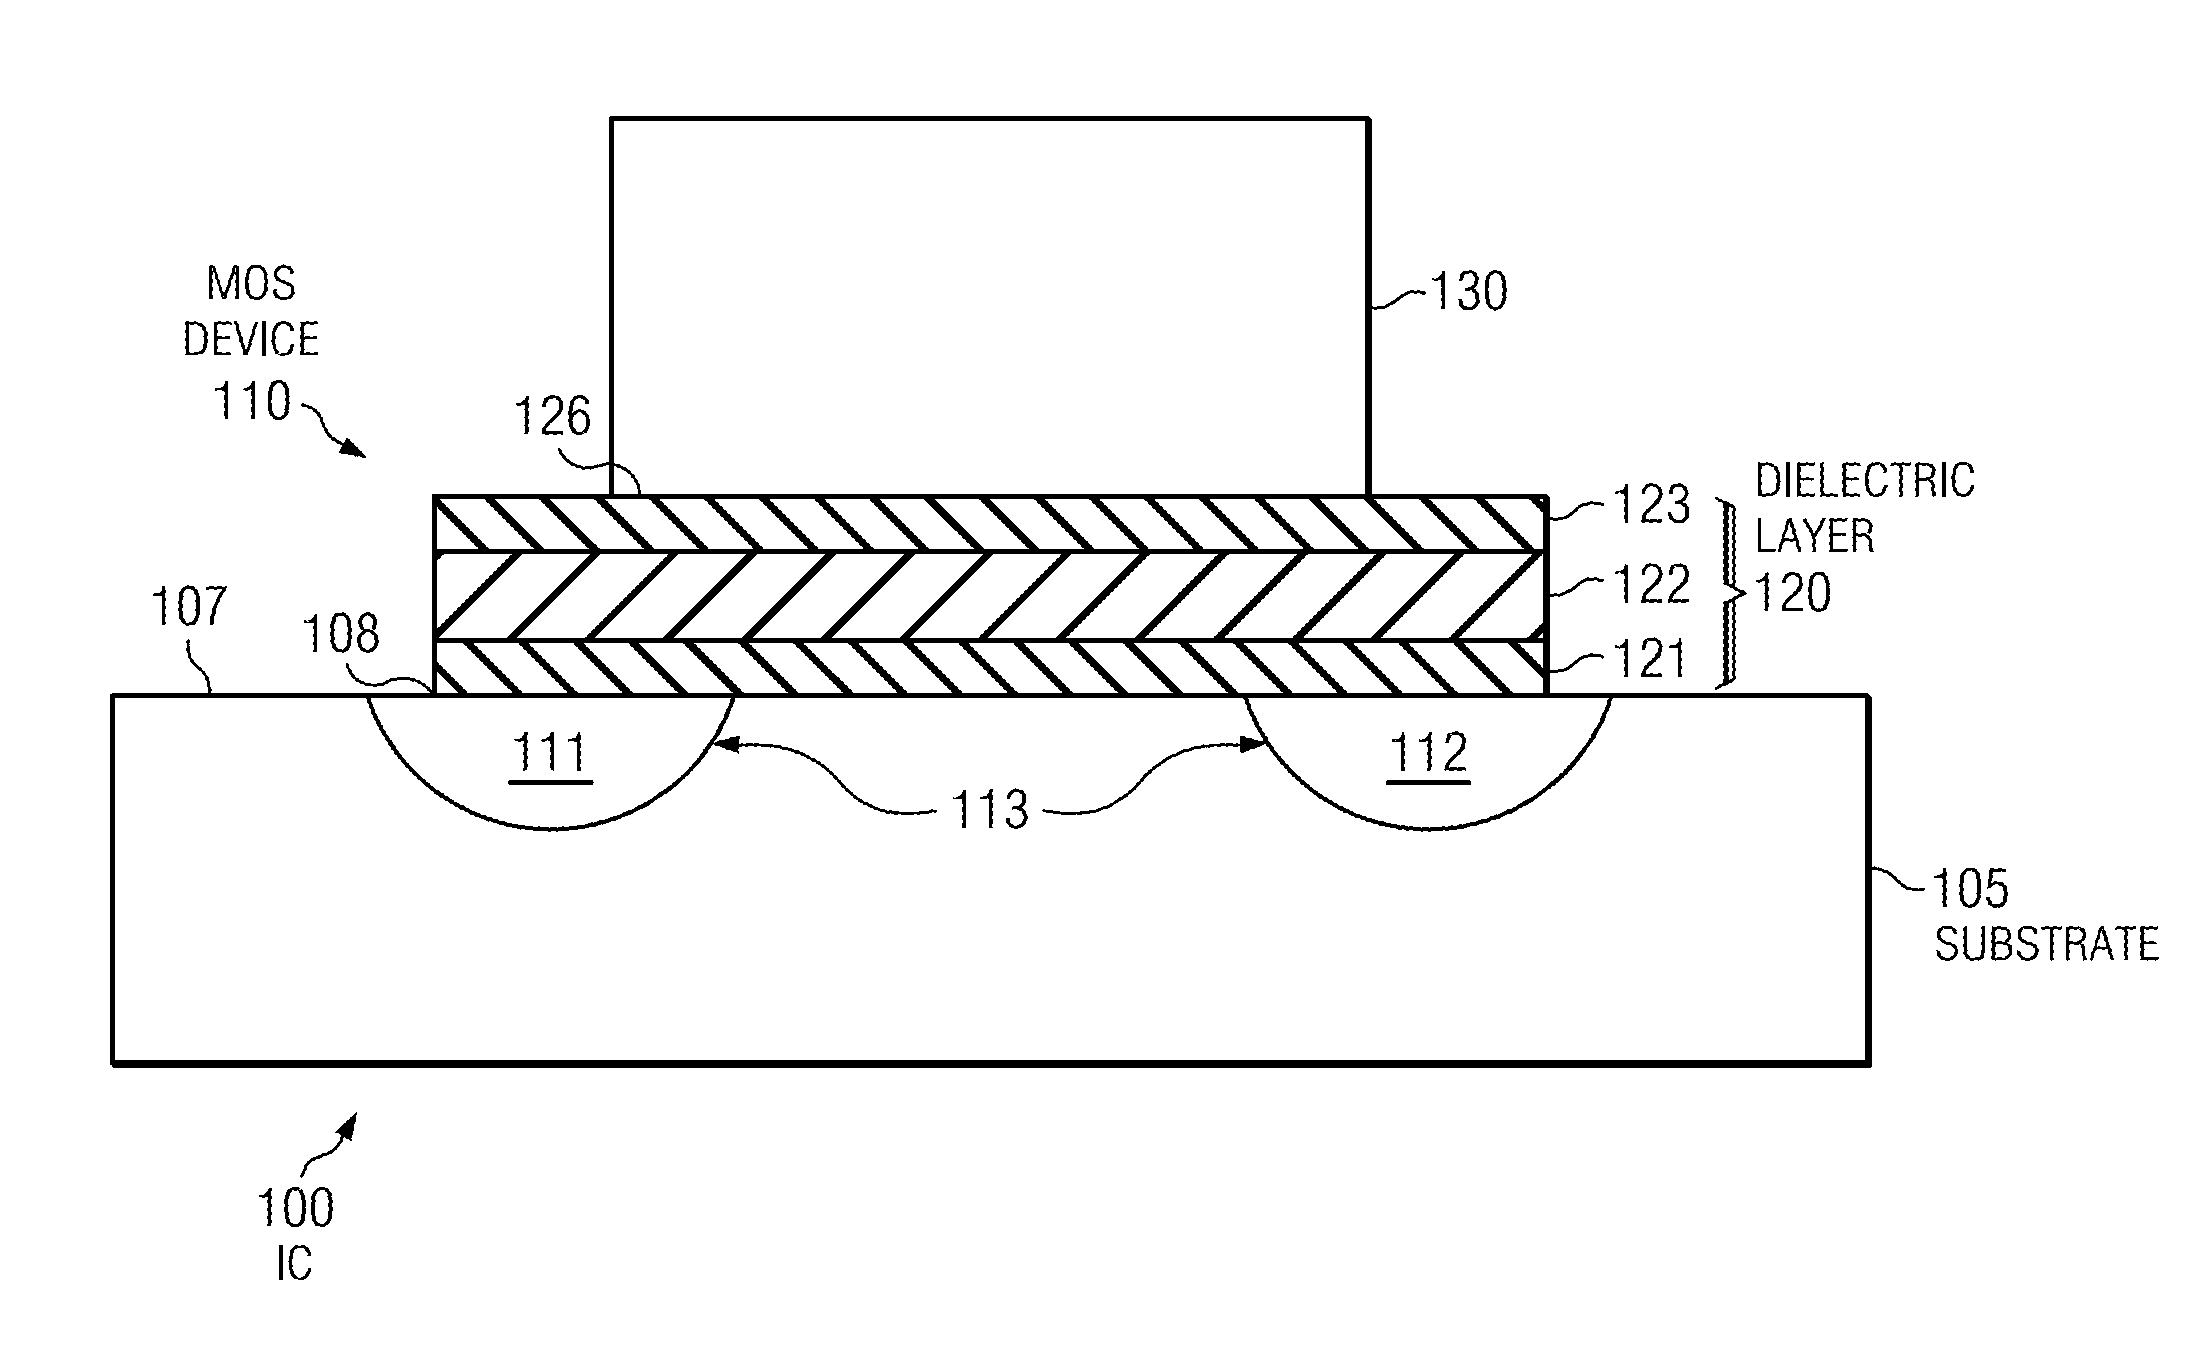 Semiconductor device including sion gate dielectric with portions having different nitrogen concentrations